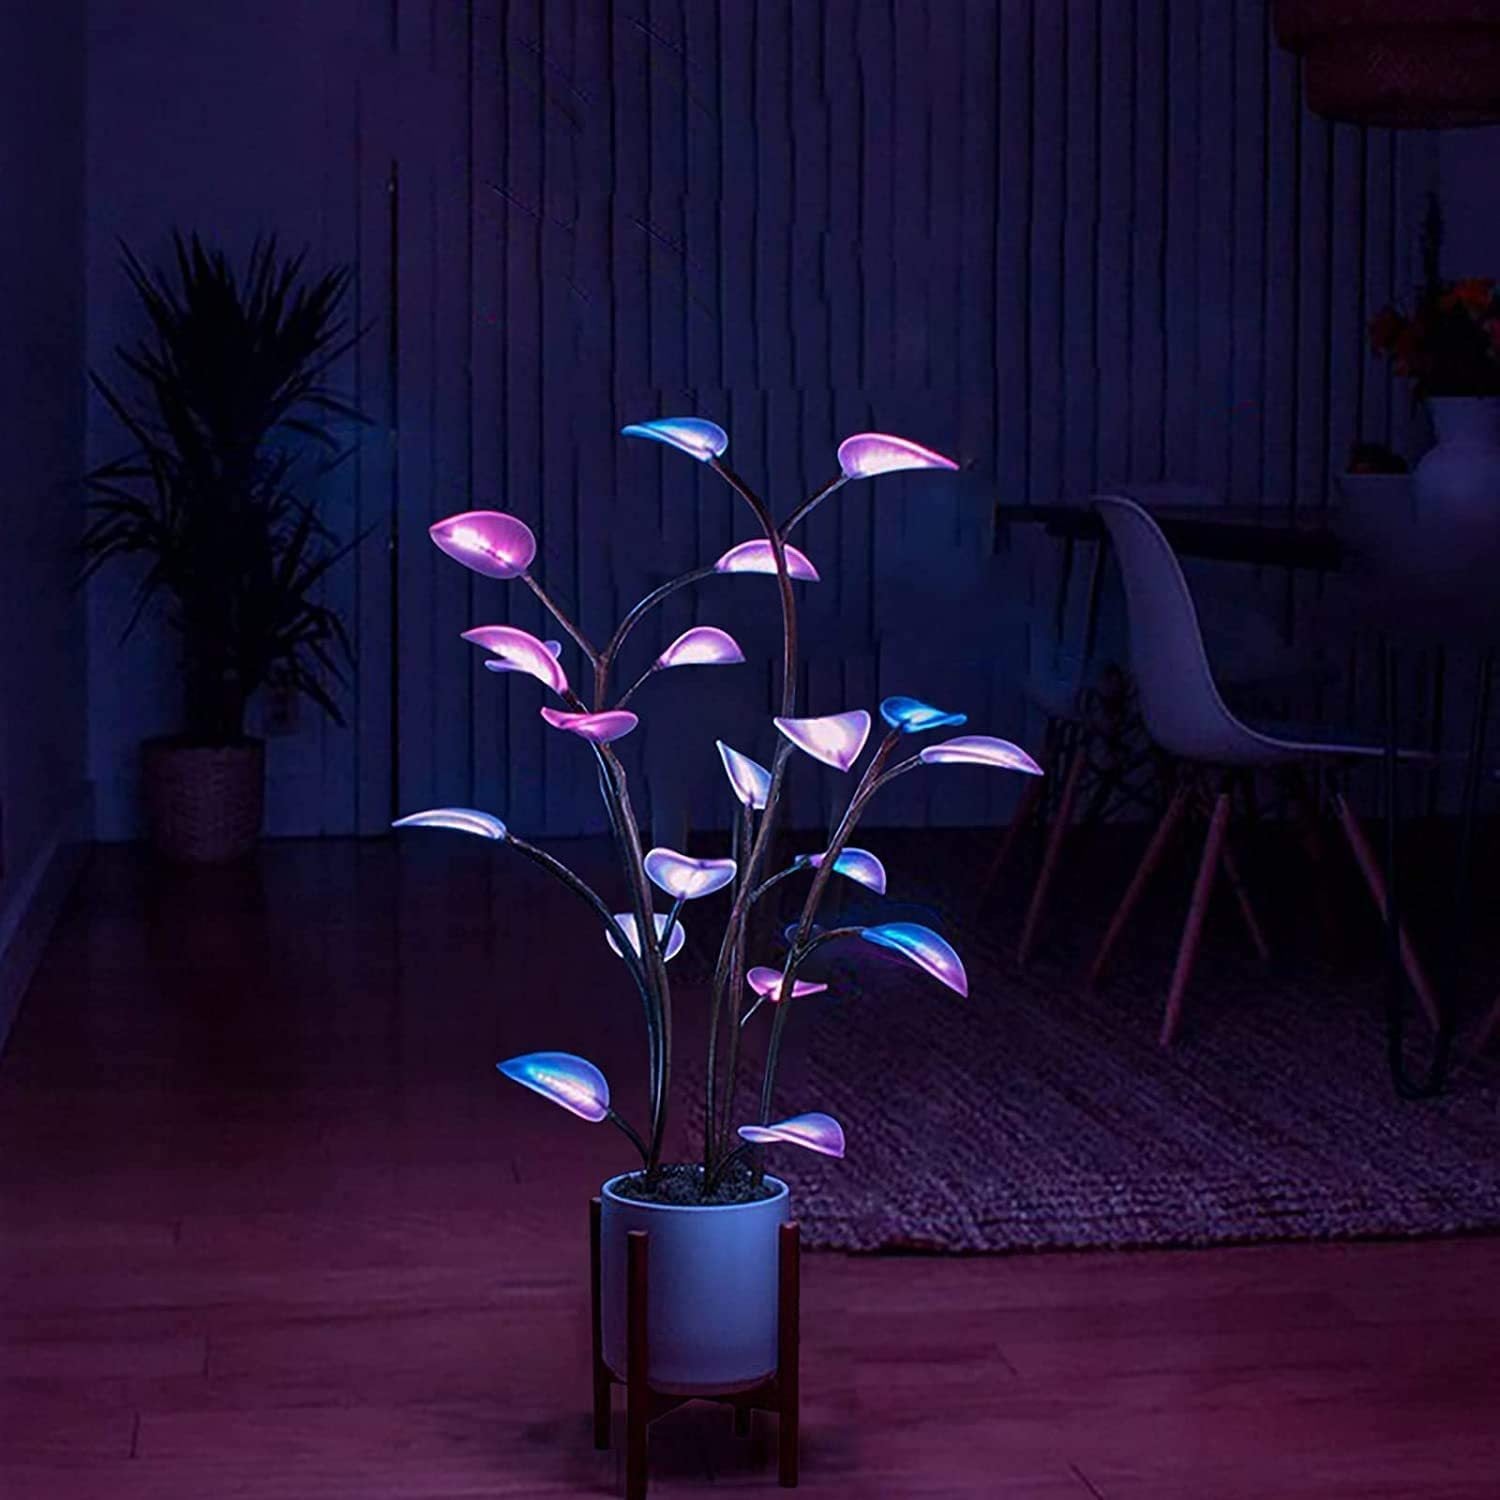 The Magical Led Houseplant - 500 Programmable LEDs, Artificial Plants for Home Decor Indoor, Decorative Fairy Light, Bonsai Houseplant Light for Social Gatherings, Dinner Parties, Date Nights